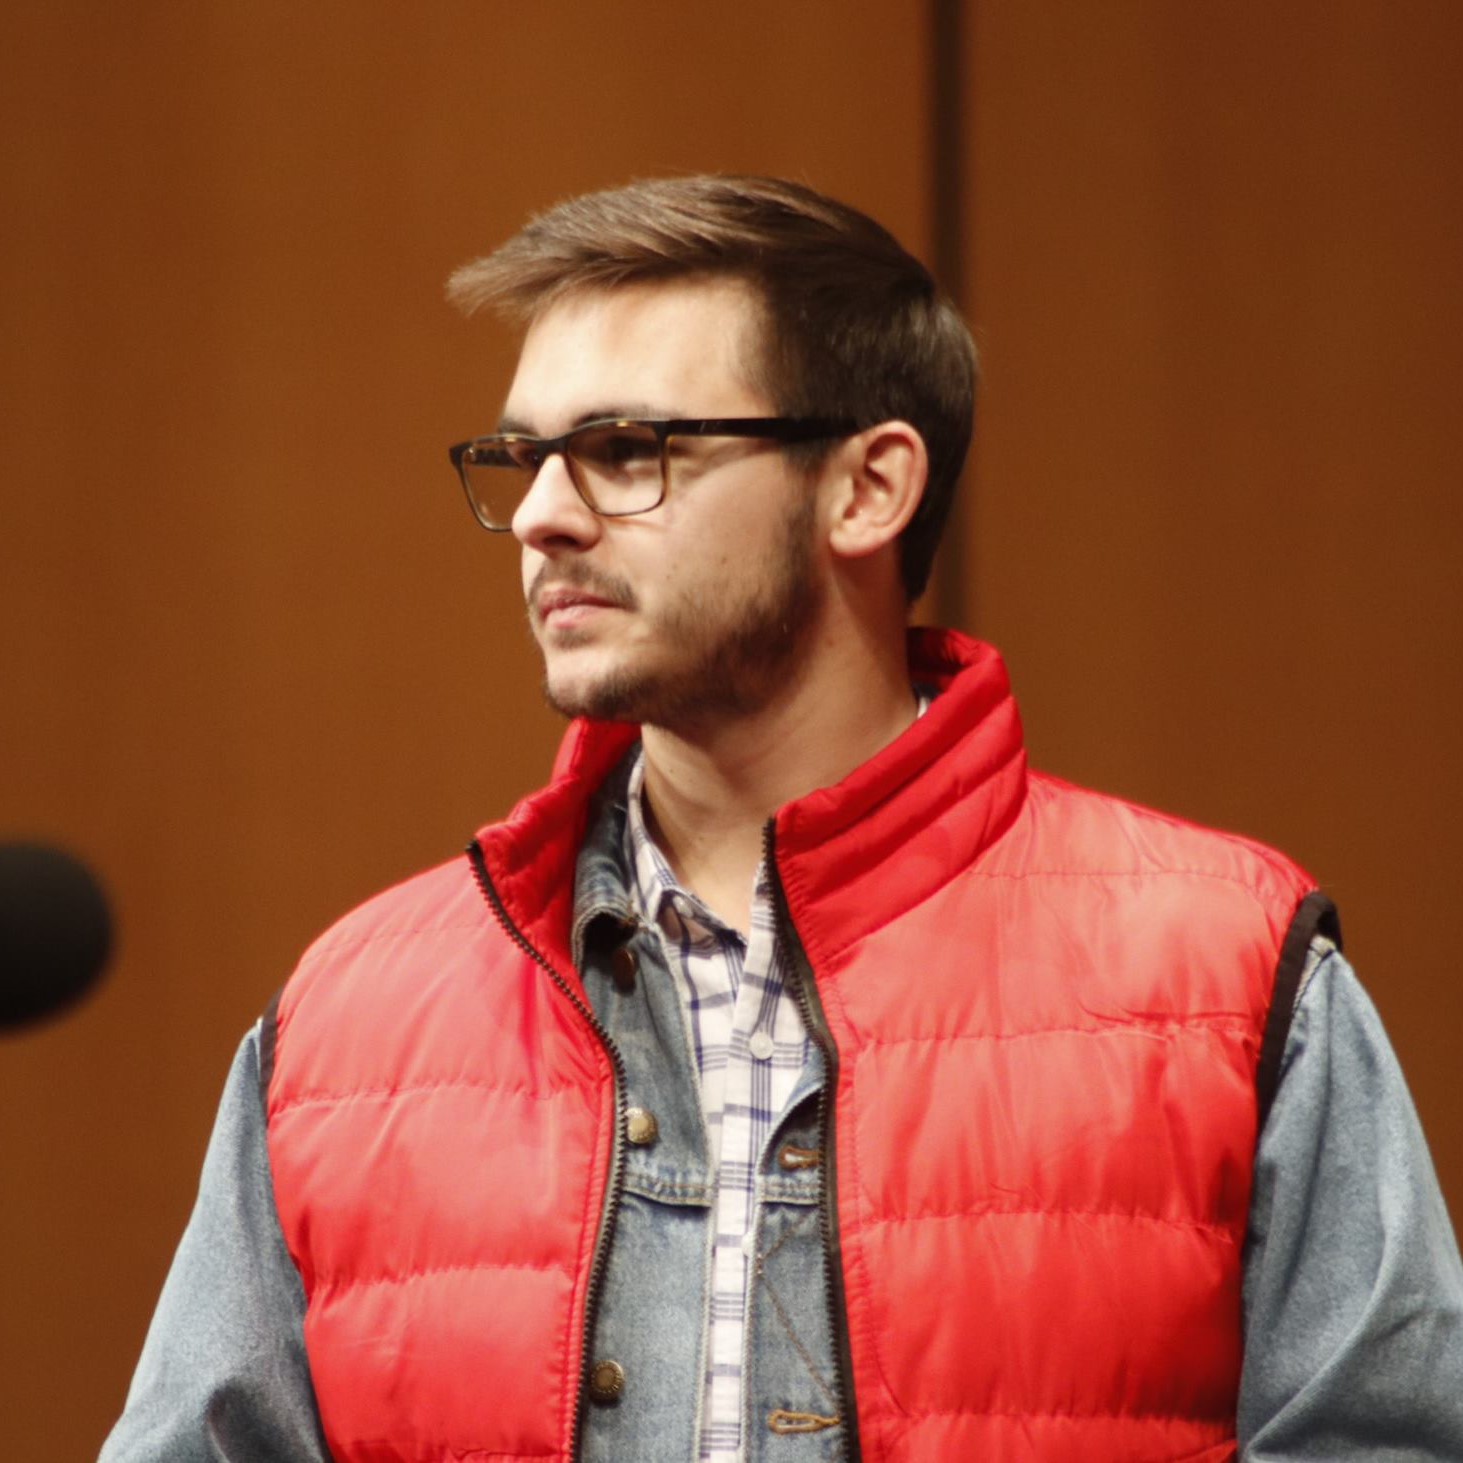 Ben Wykoff dressed as Marty McFly for the Alliance Symphony Orchestra Halloween Concert, 2022